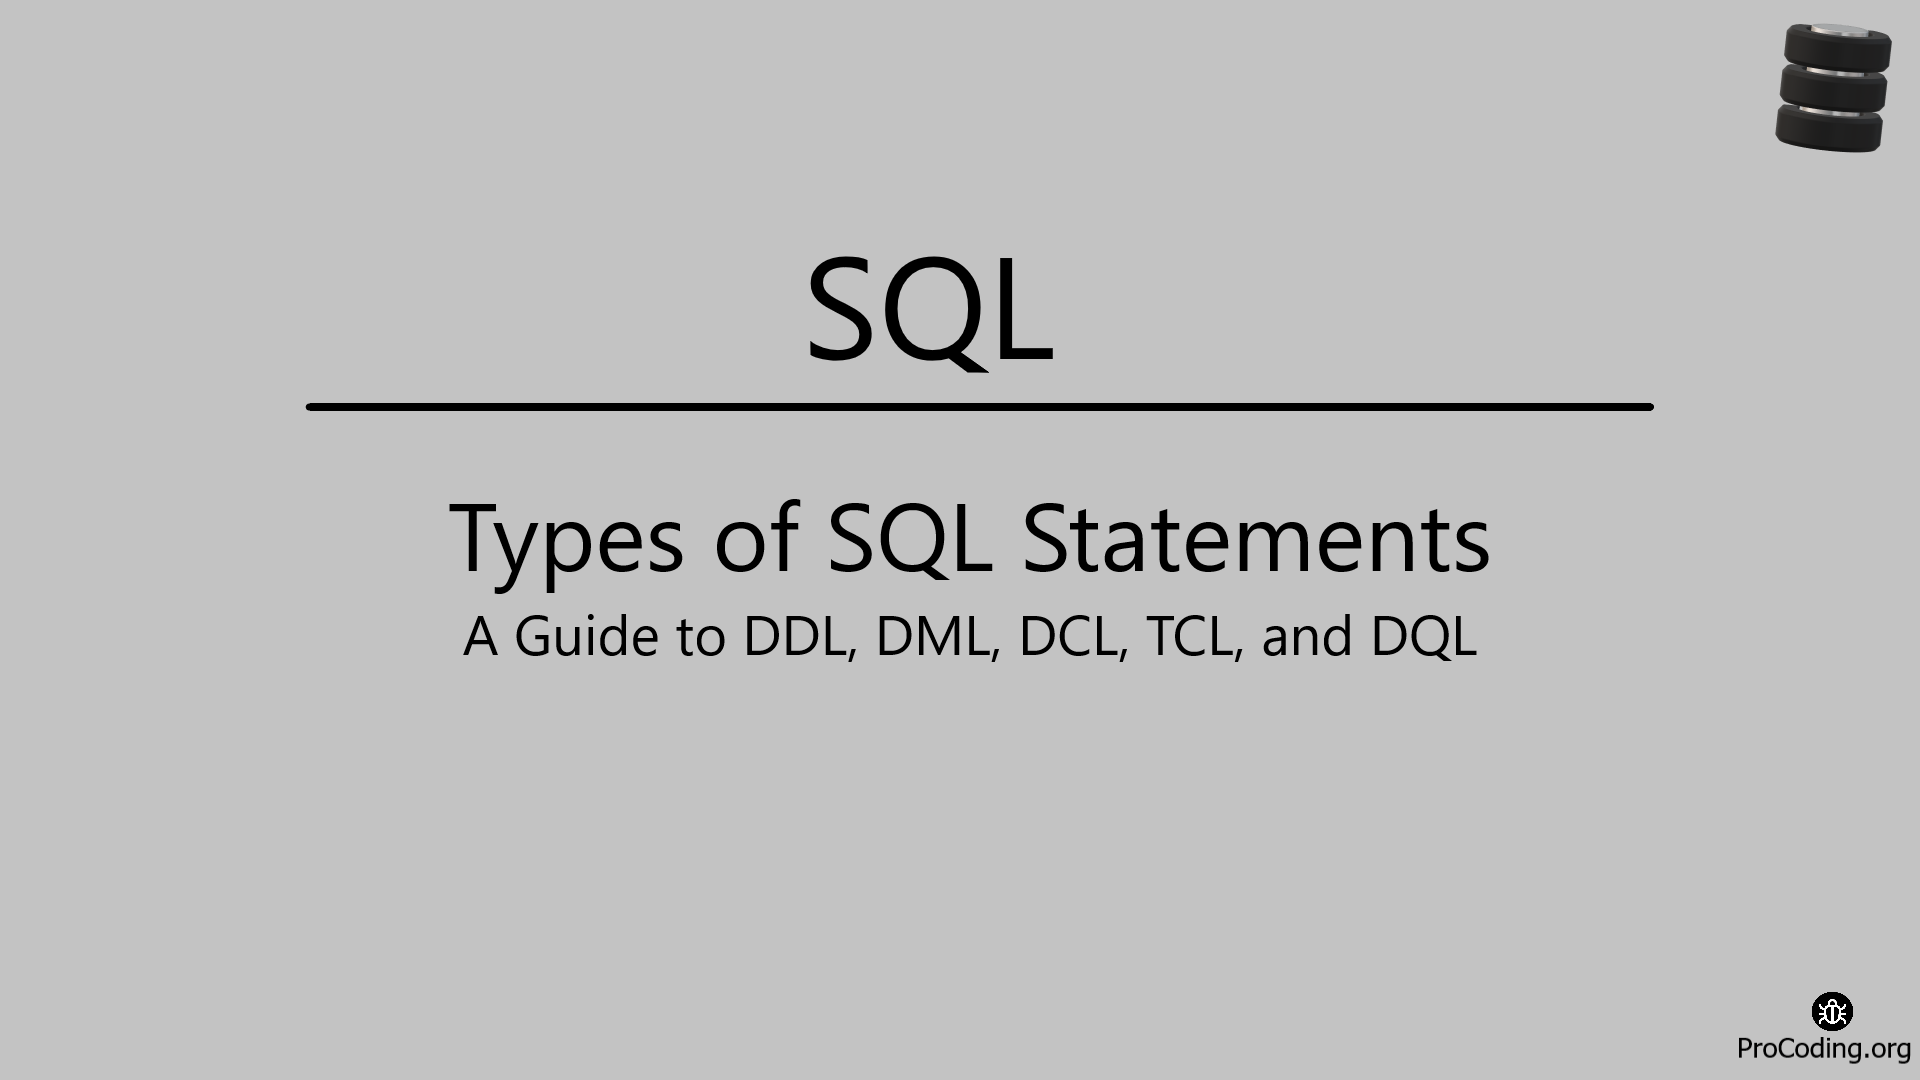 Types of SQL statements